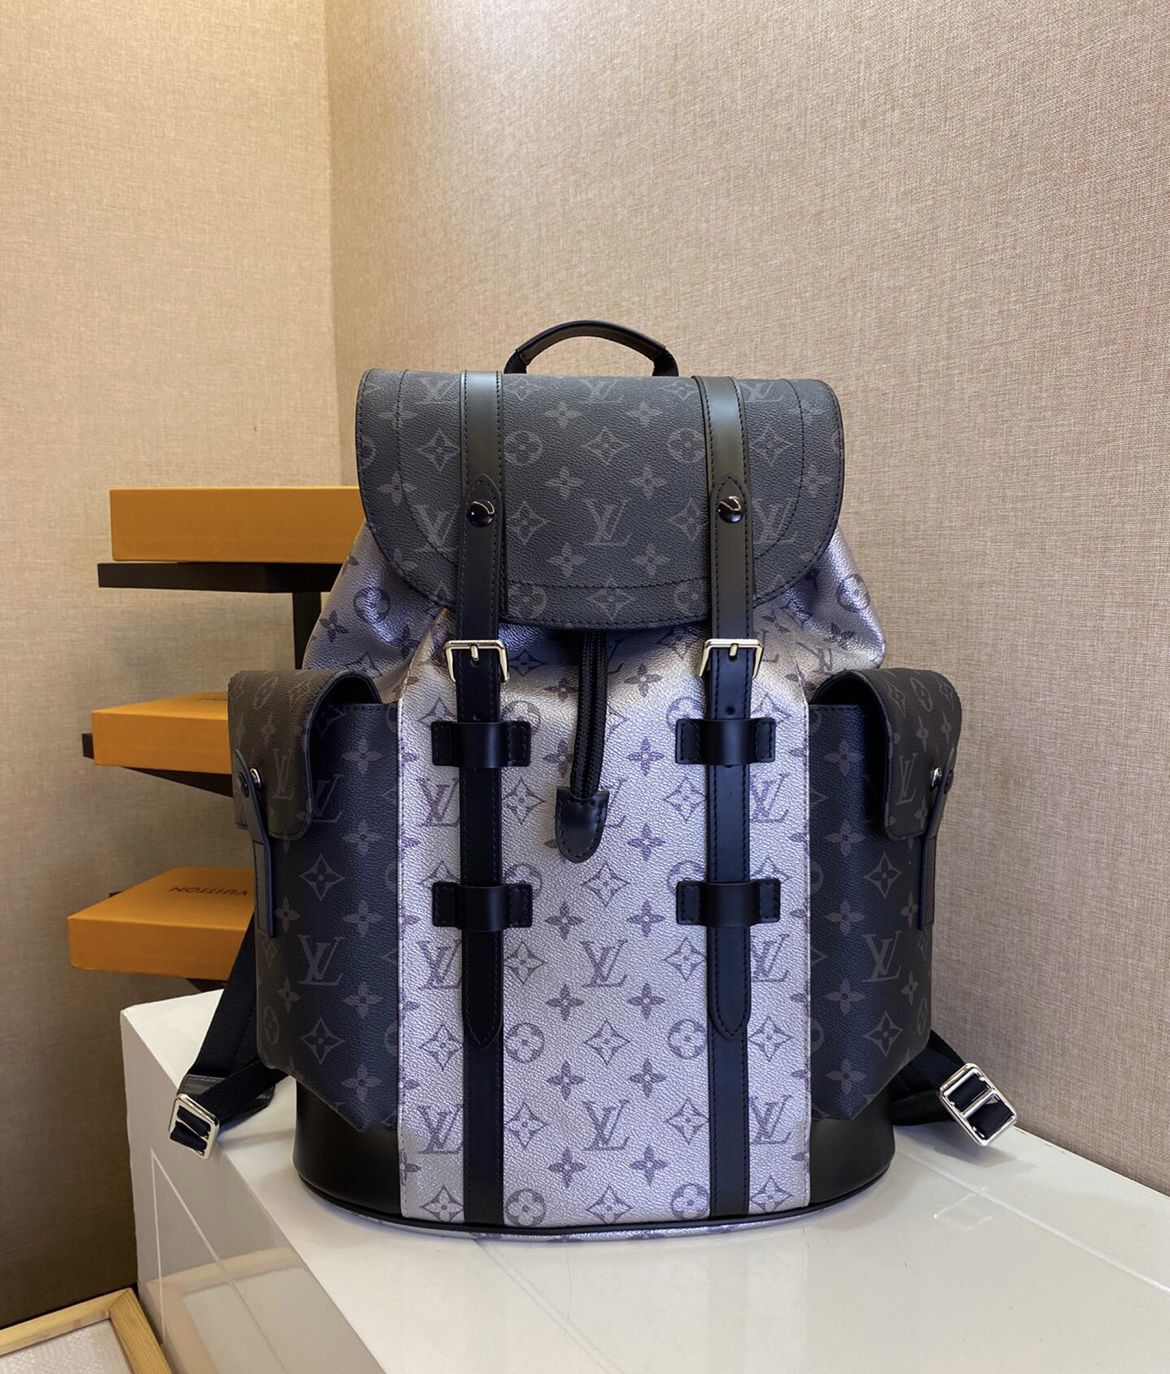 Supreme Louis Vuitton Backpack for Sale in San Leandro, CA - OfferUp